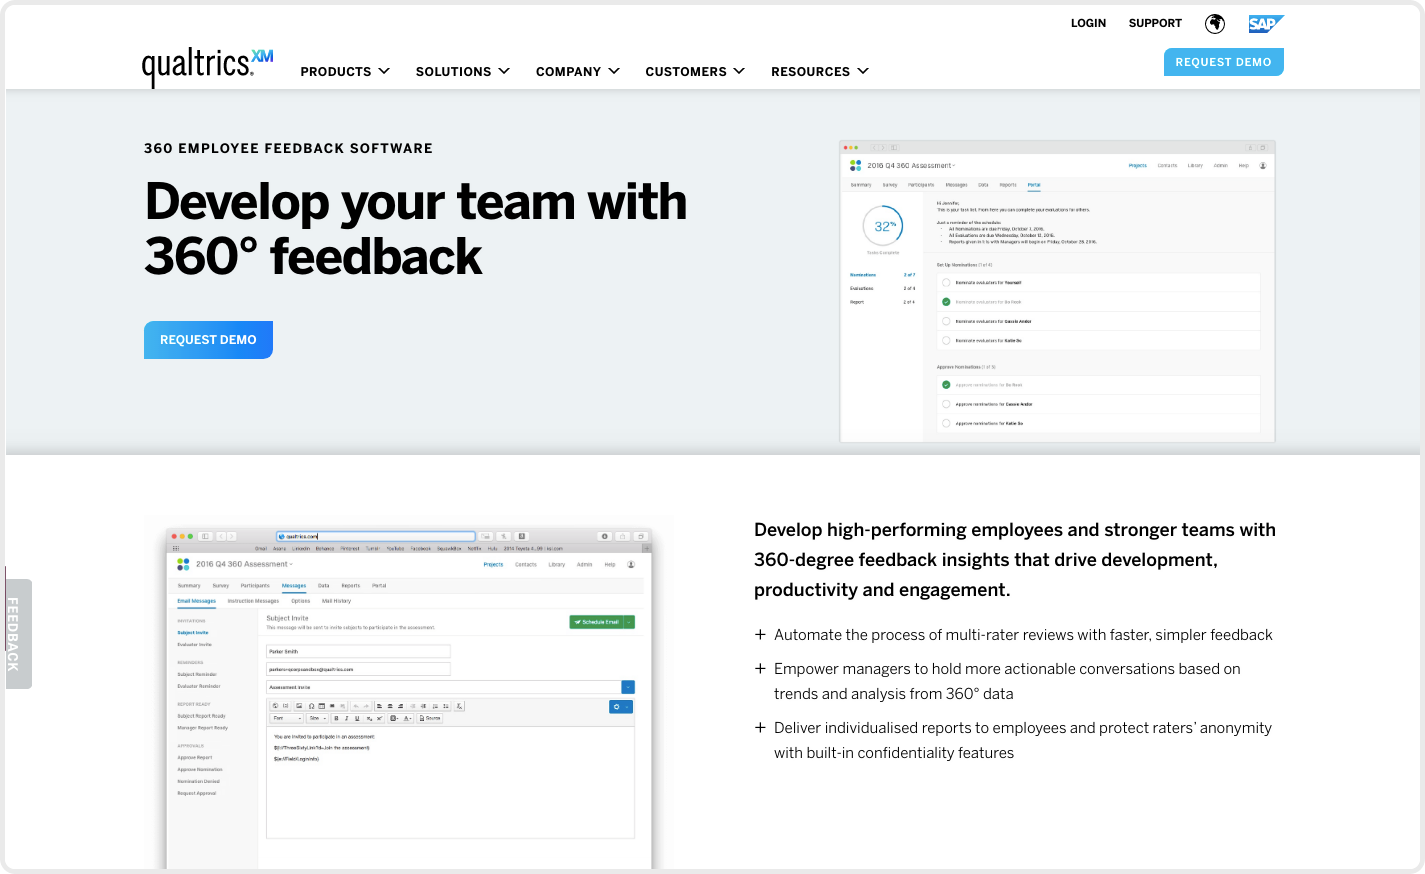 The experience management company, Qualtrics offers 360 feedback as part of their Employee XM.